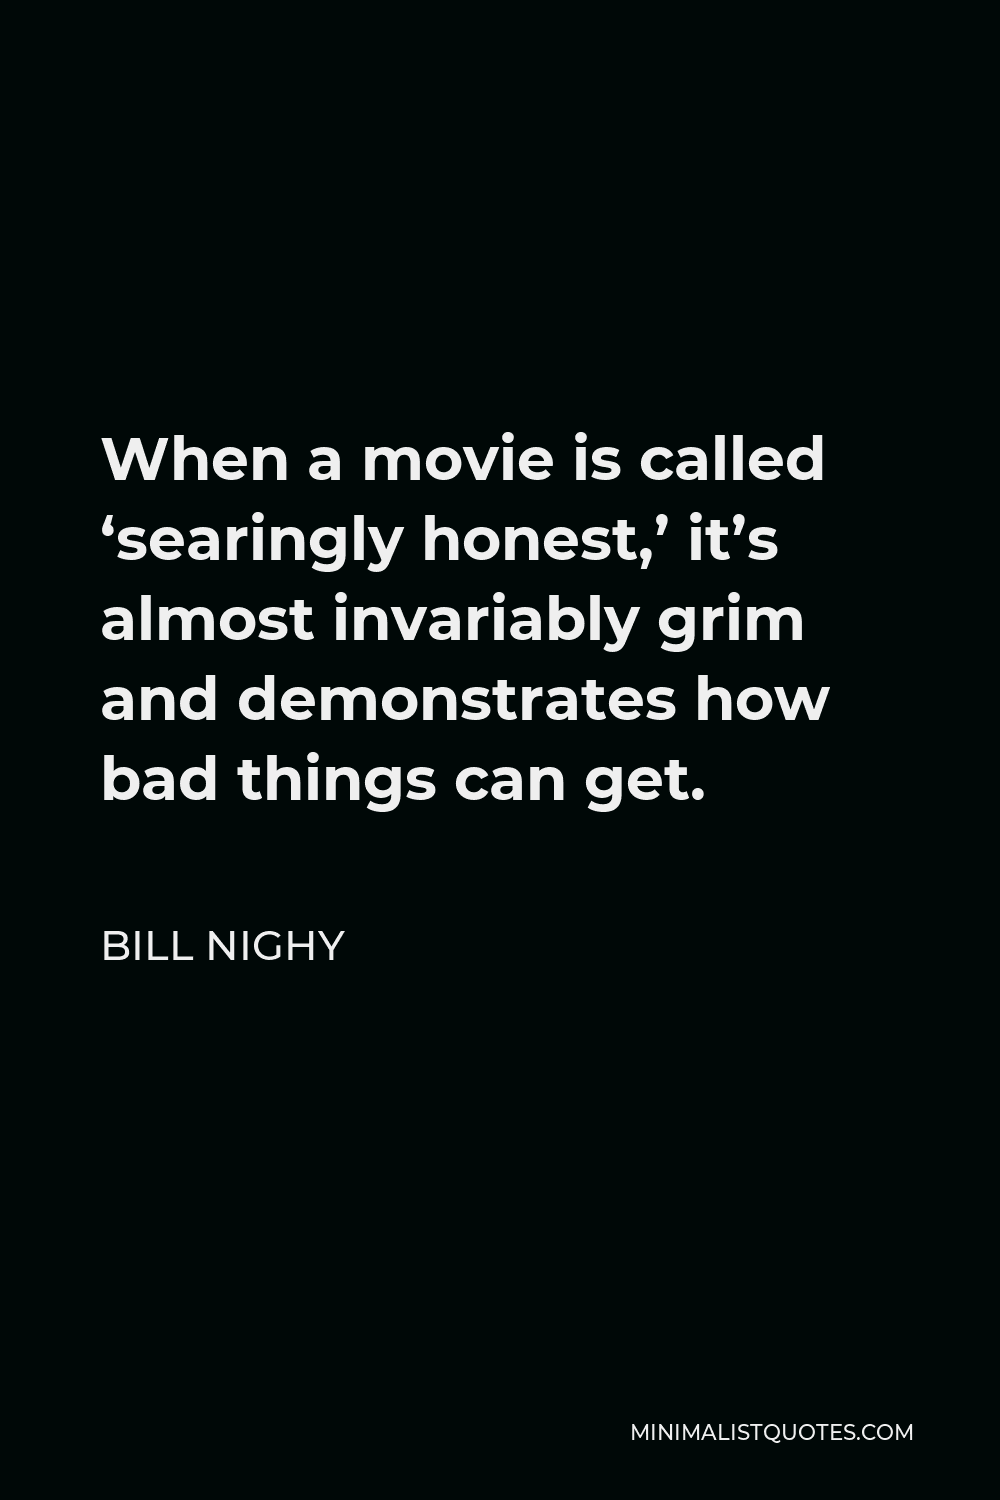 Bill Nighy Quote - When a movie is called ‘searingly honest,’ it’s almost invariably grim and demonstrates how bad things can get.